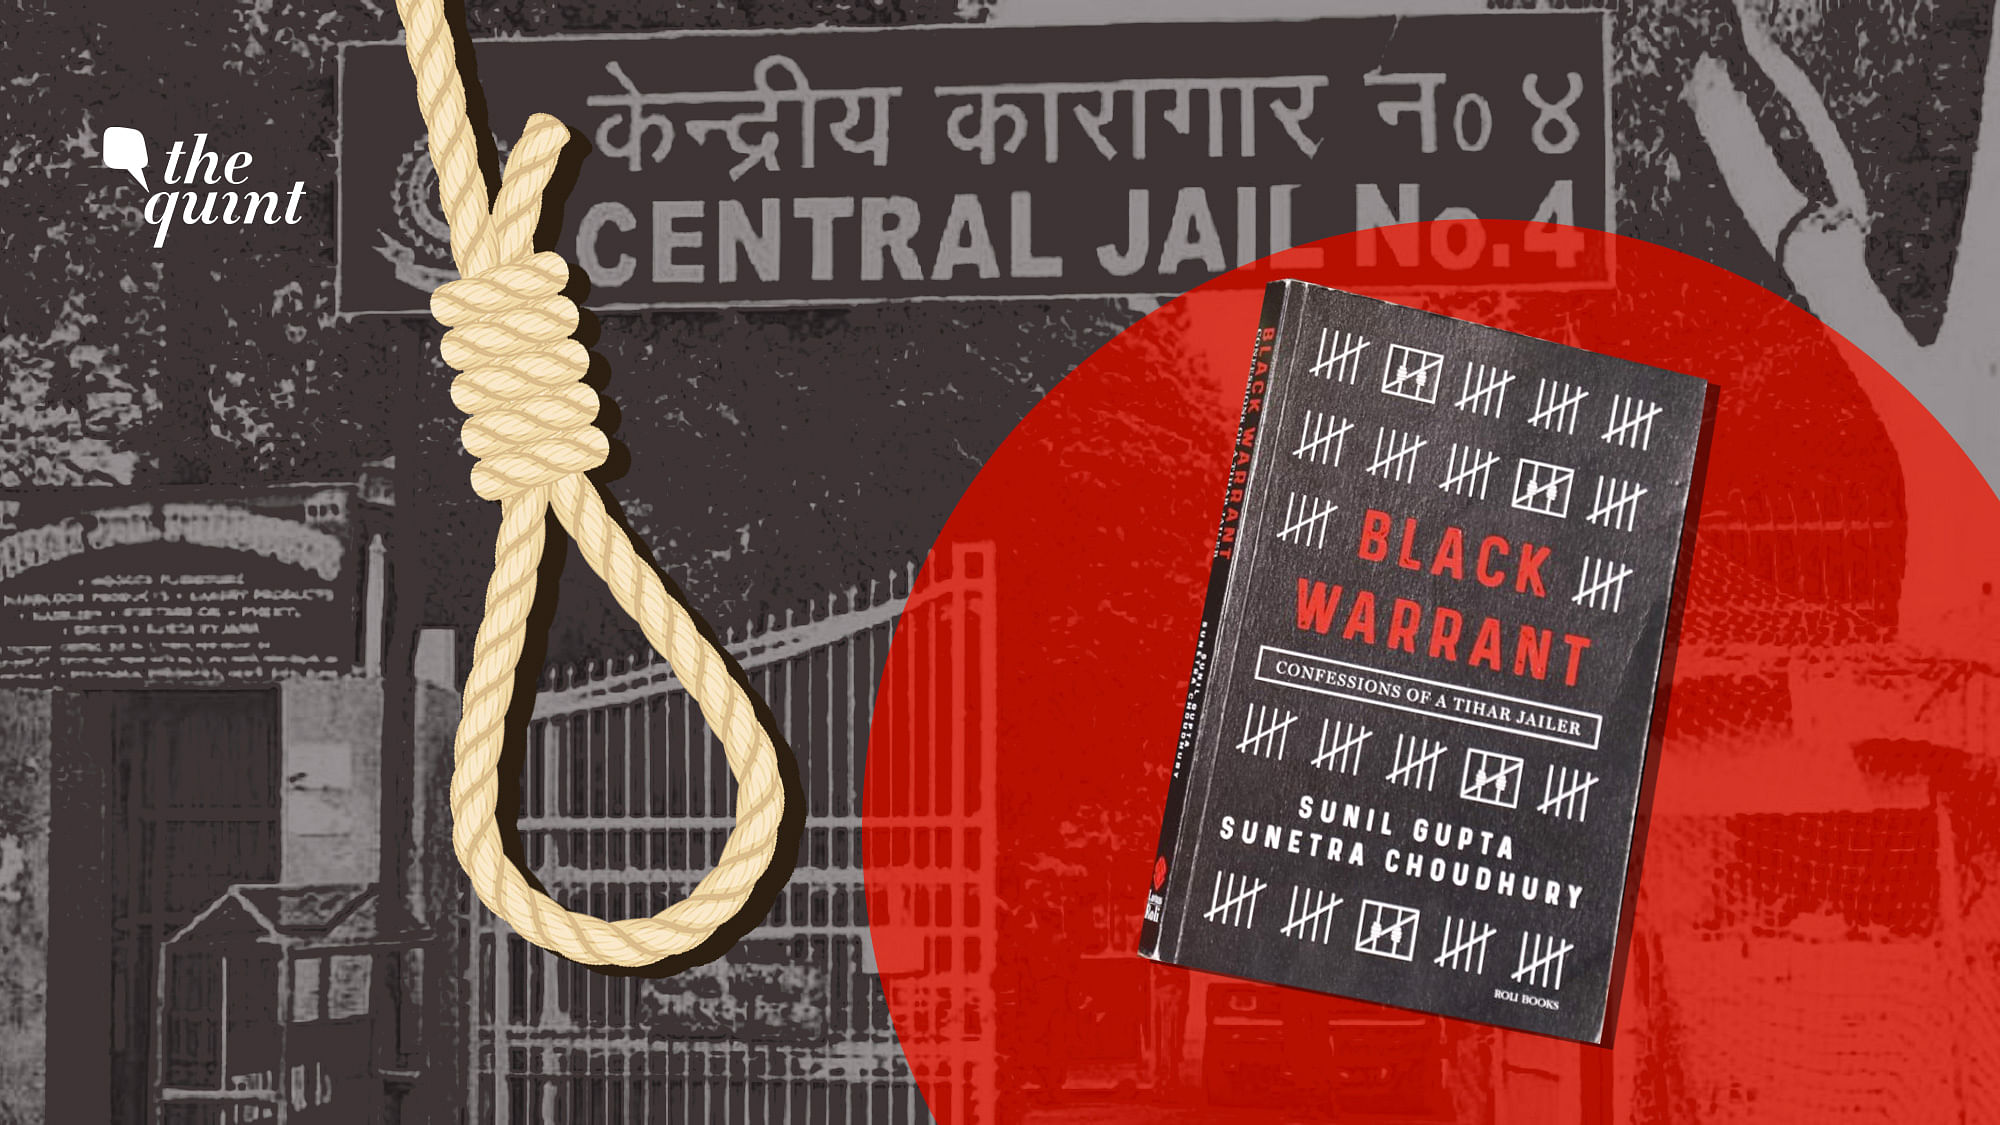 How much do we really know about Tihar Jail, its prisoners and the process of executions?